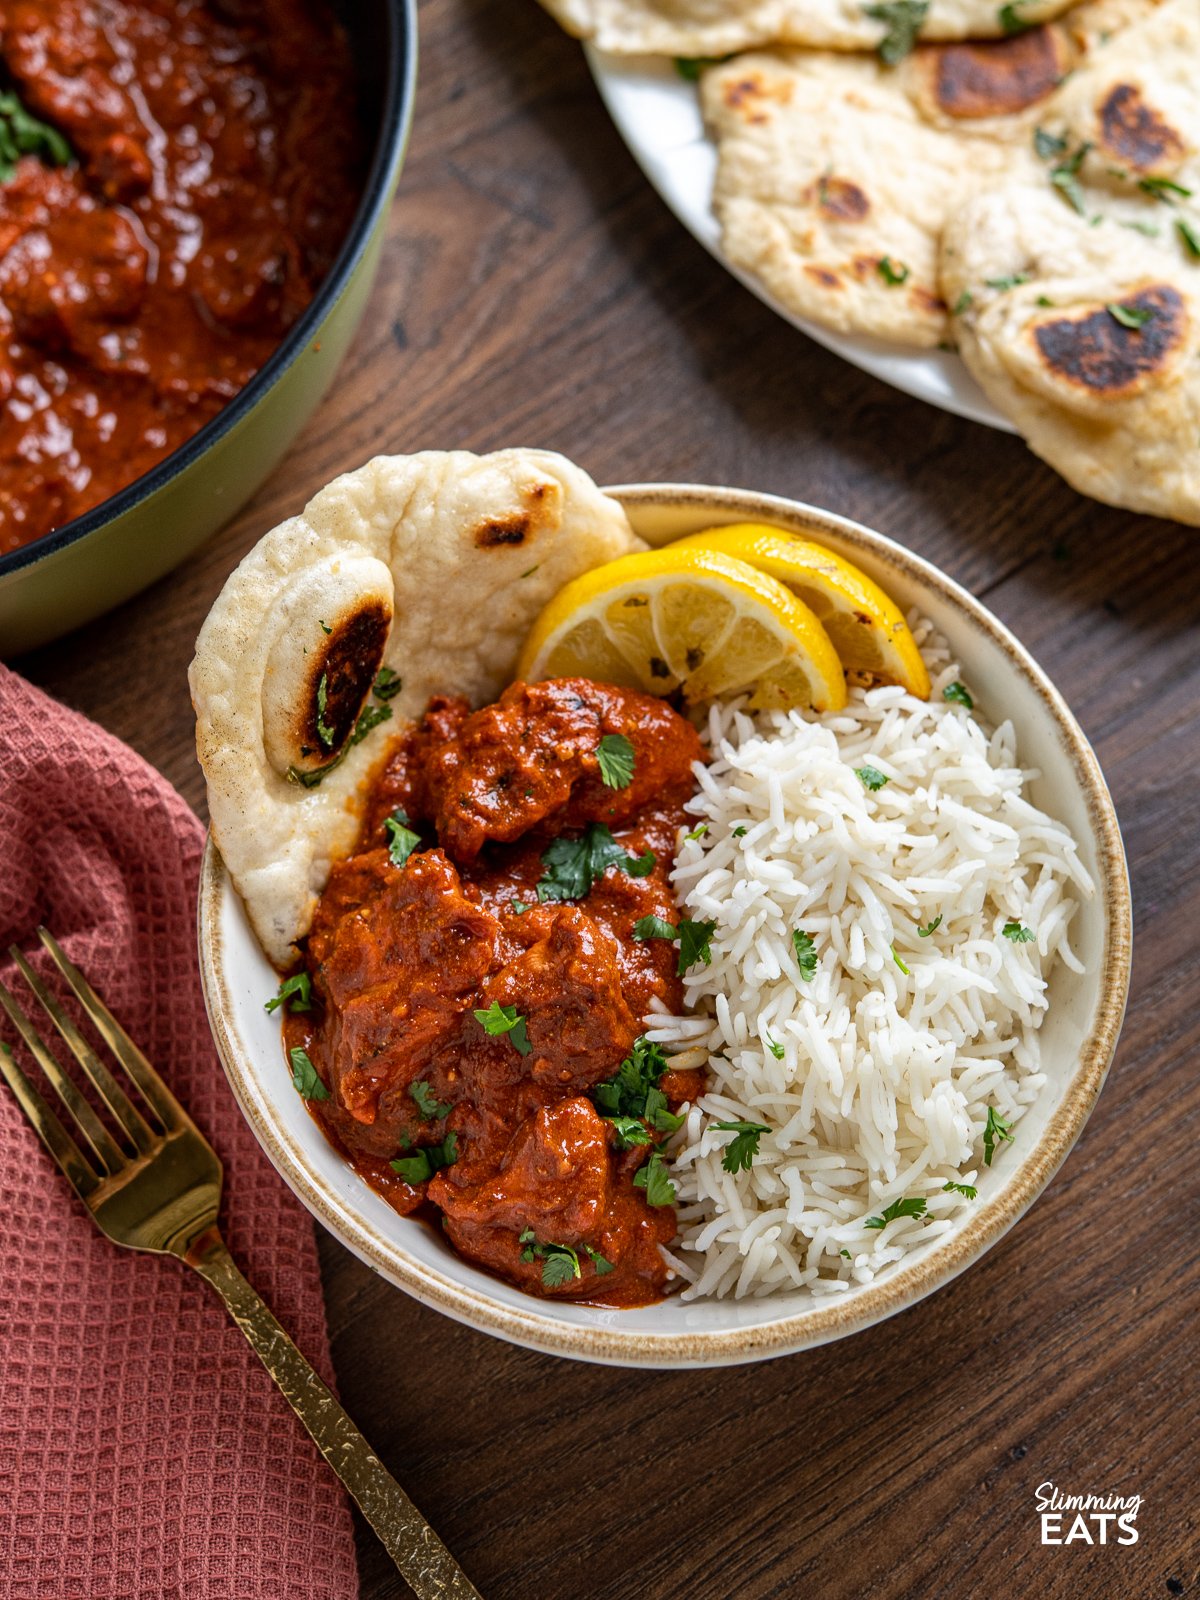 Lighter Chicken Tikka Masala in white bowl with tan rim served with rice, naan and lemon slices